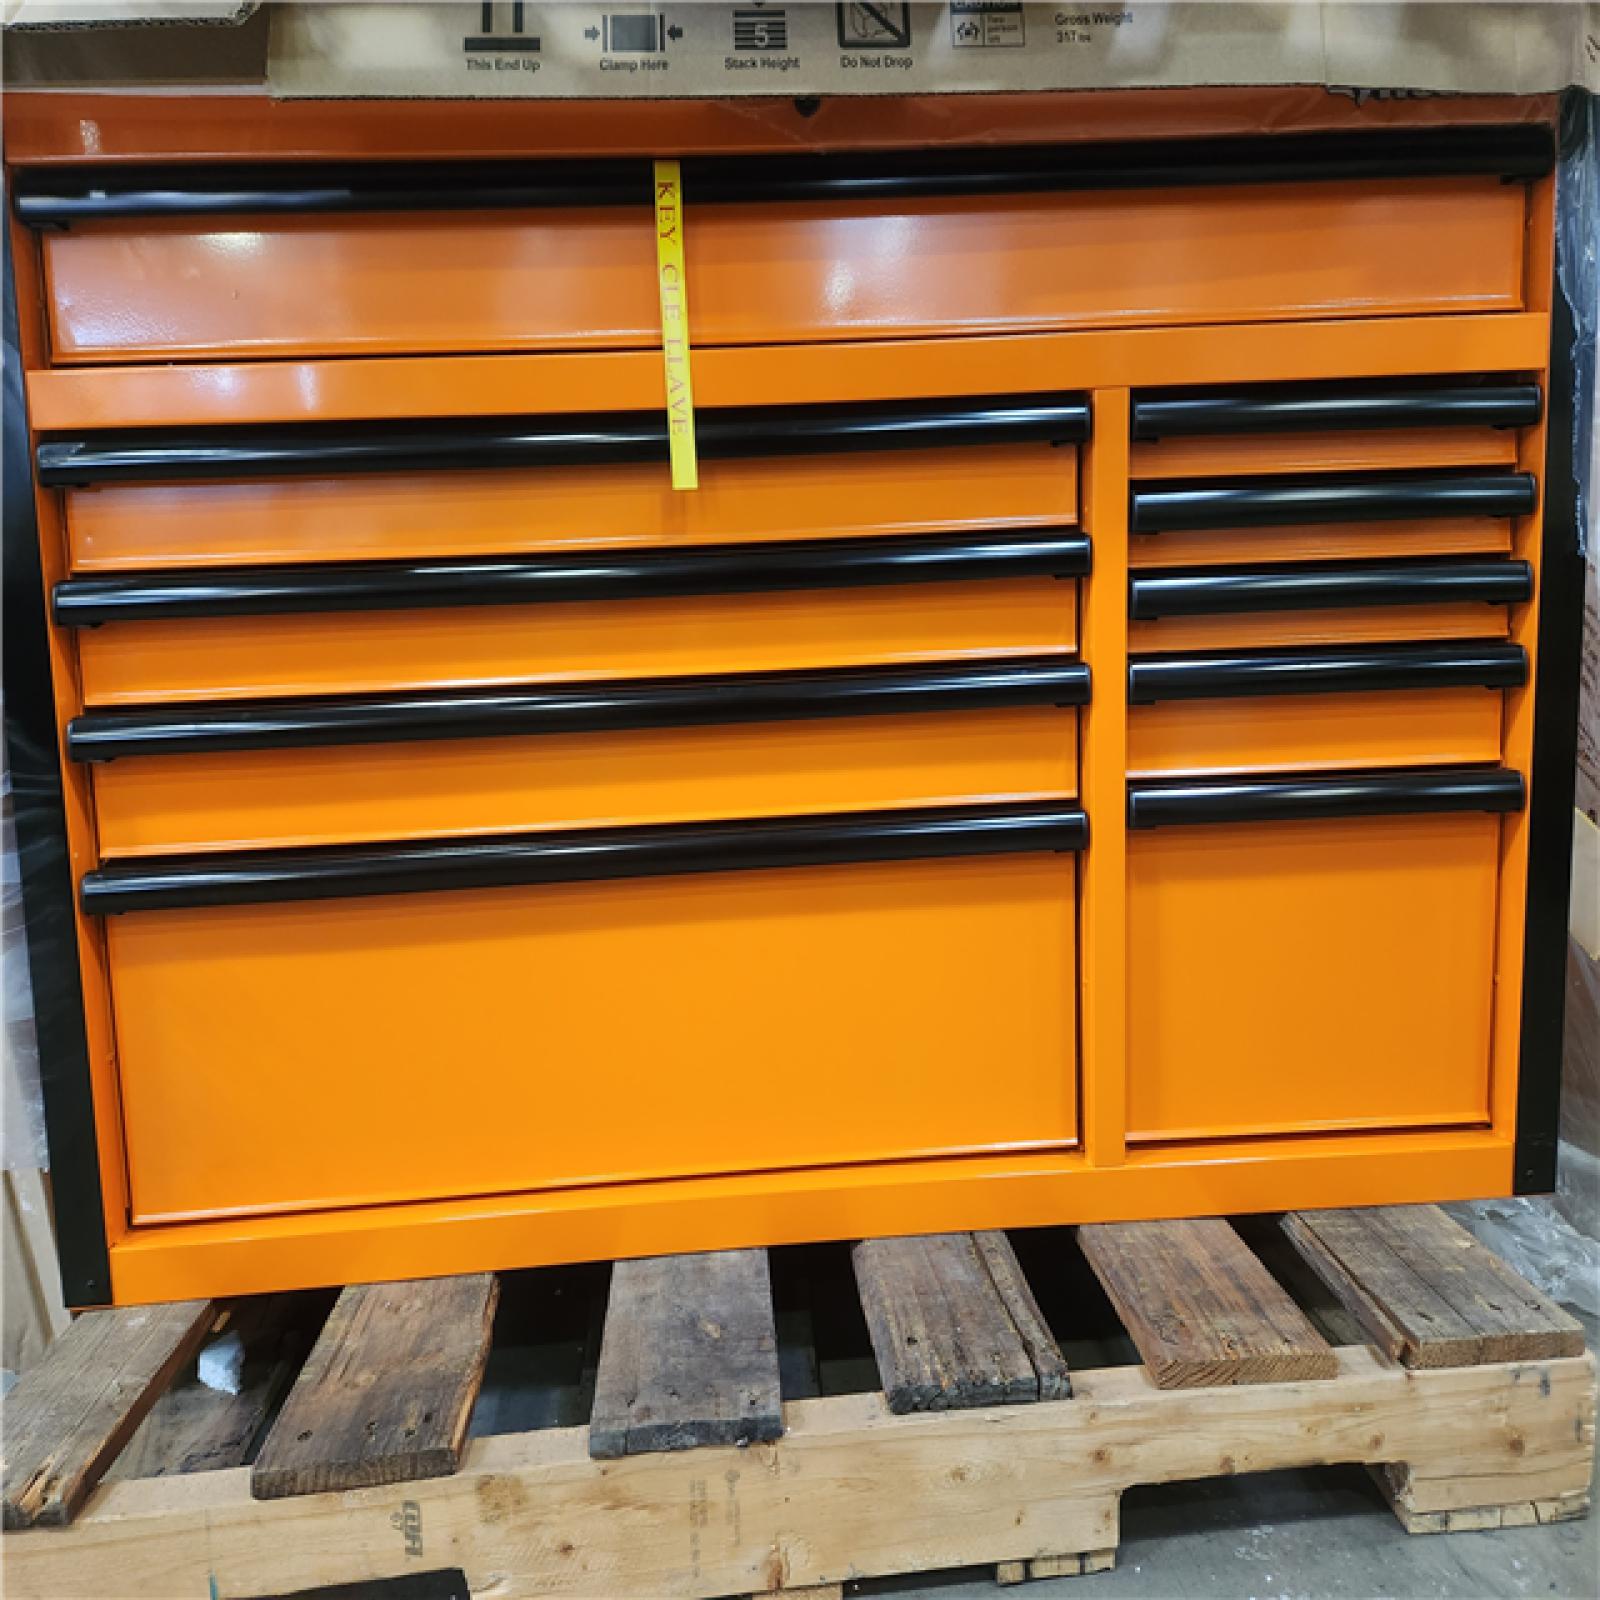 Phoenix Location NEW Husky 52 in. W x 24.5 in. D Standard Duty 10-Drawer Mobile Workbench Tool Chest with Solid Wood Work Top in Gloss Orange